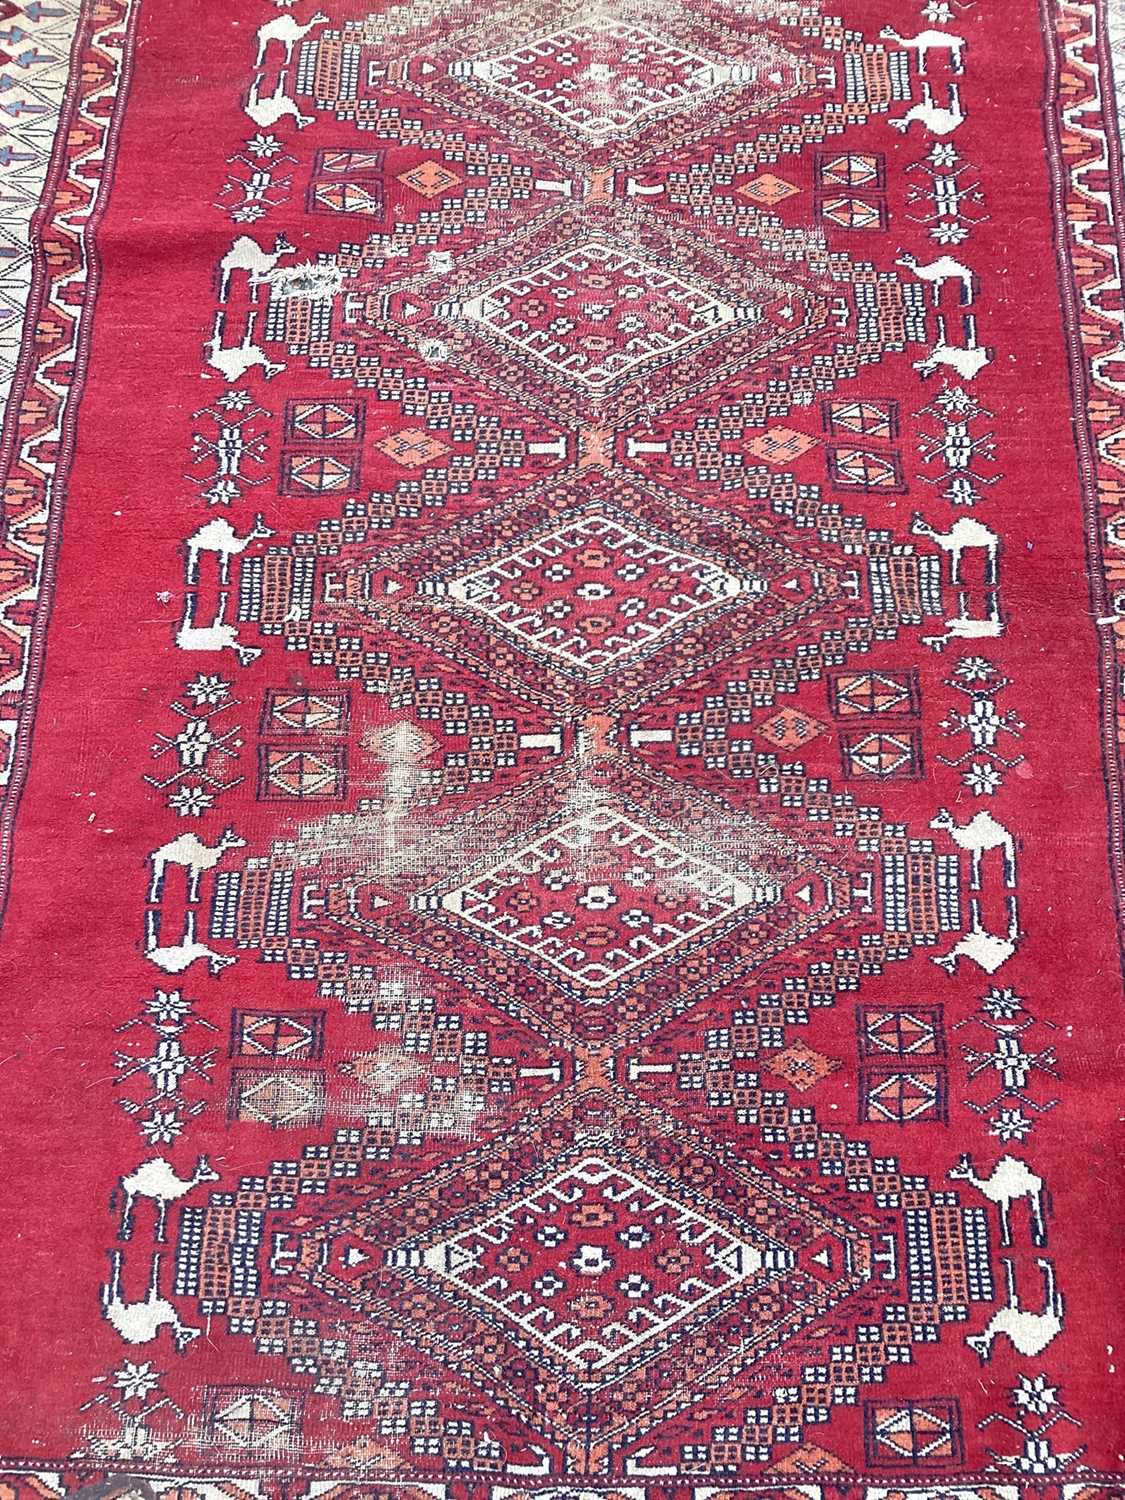 Lot 1439 - Eastern rug with six central medallions on red and cream ground, 167cm x 123cm